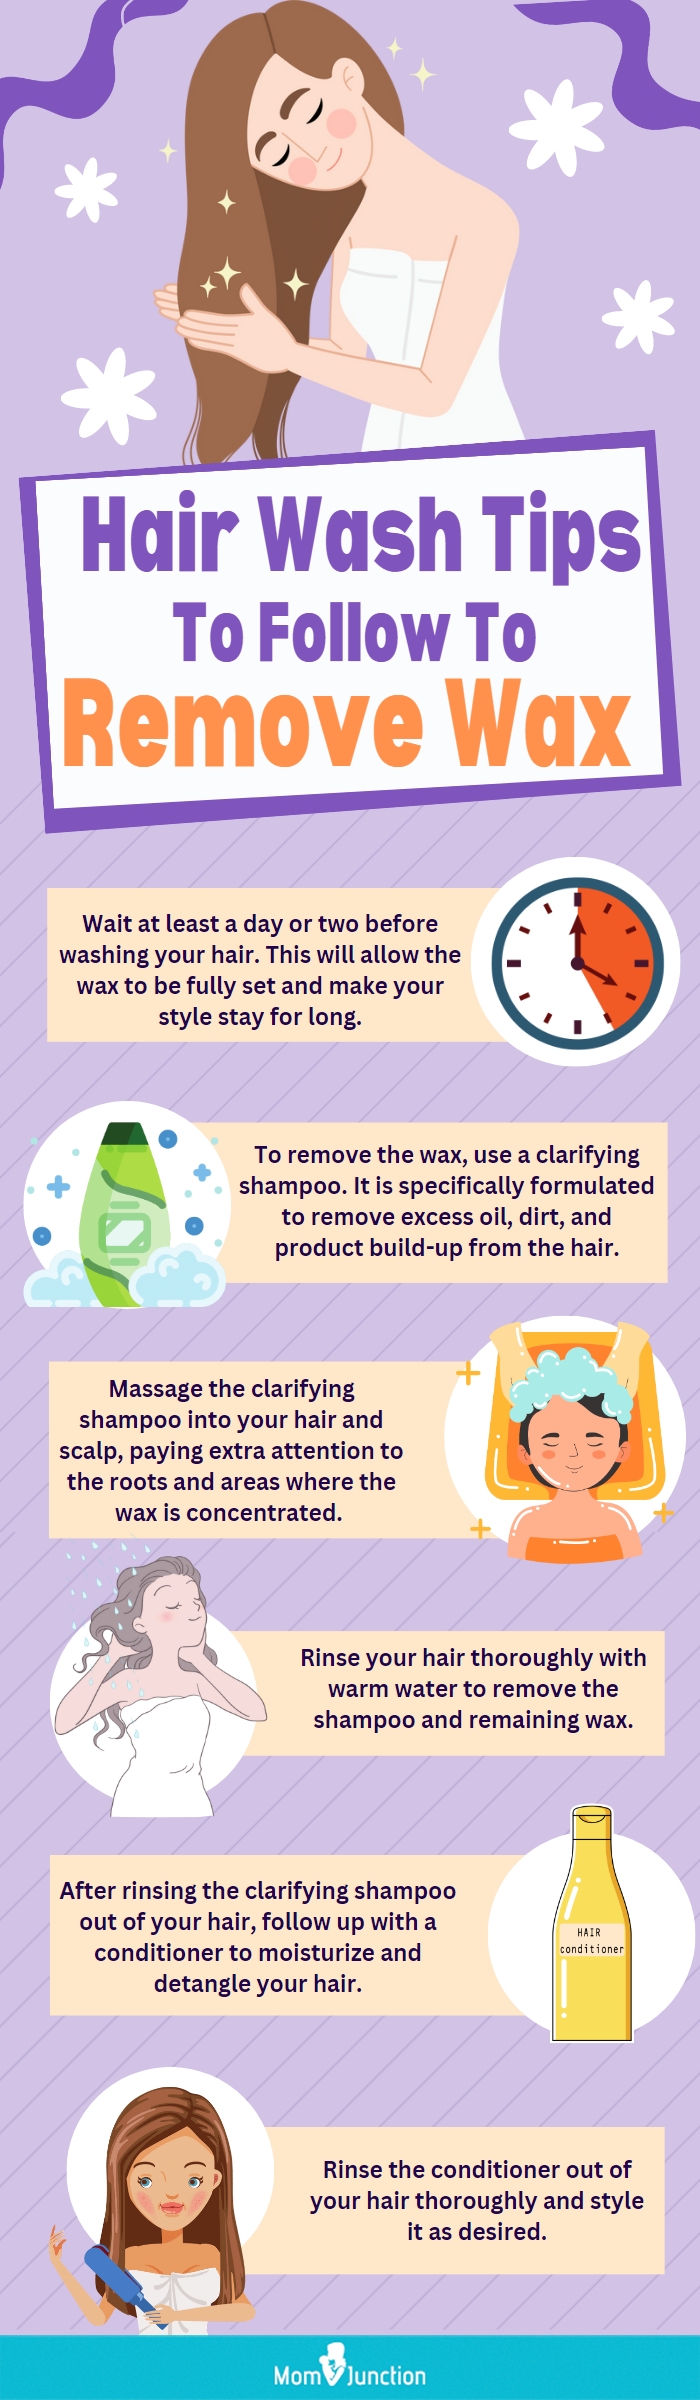 Hair Wash Tips To Follow To Remove Wax Row-28 content team (infographic)